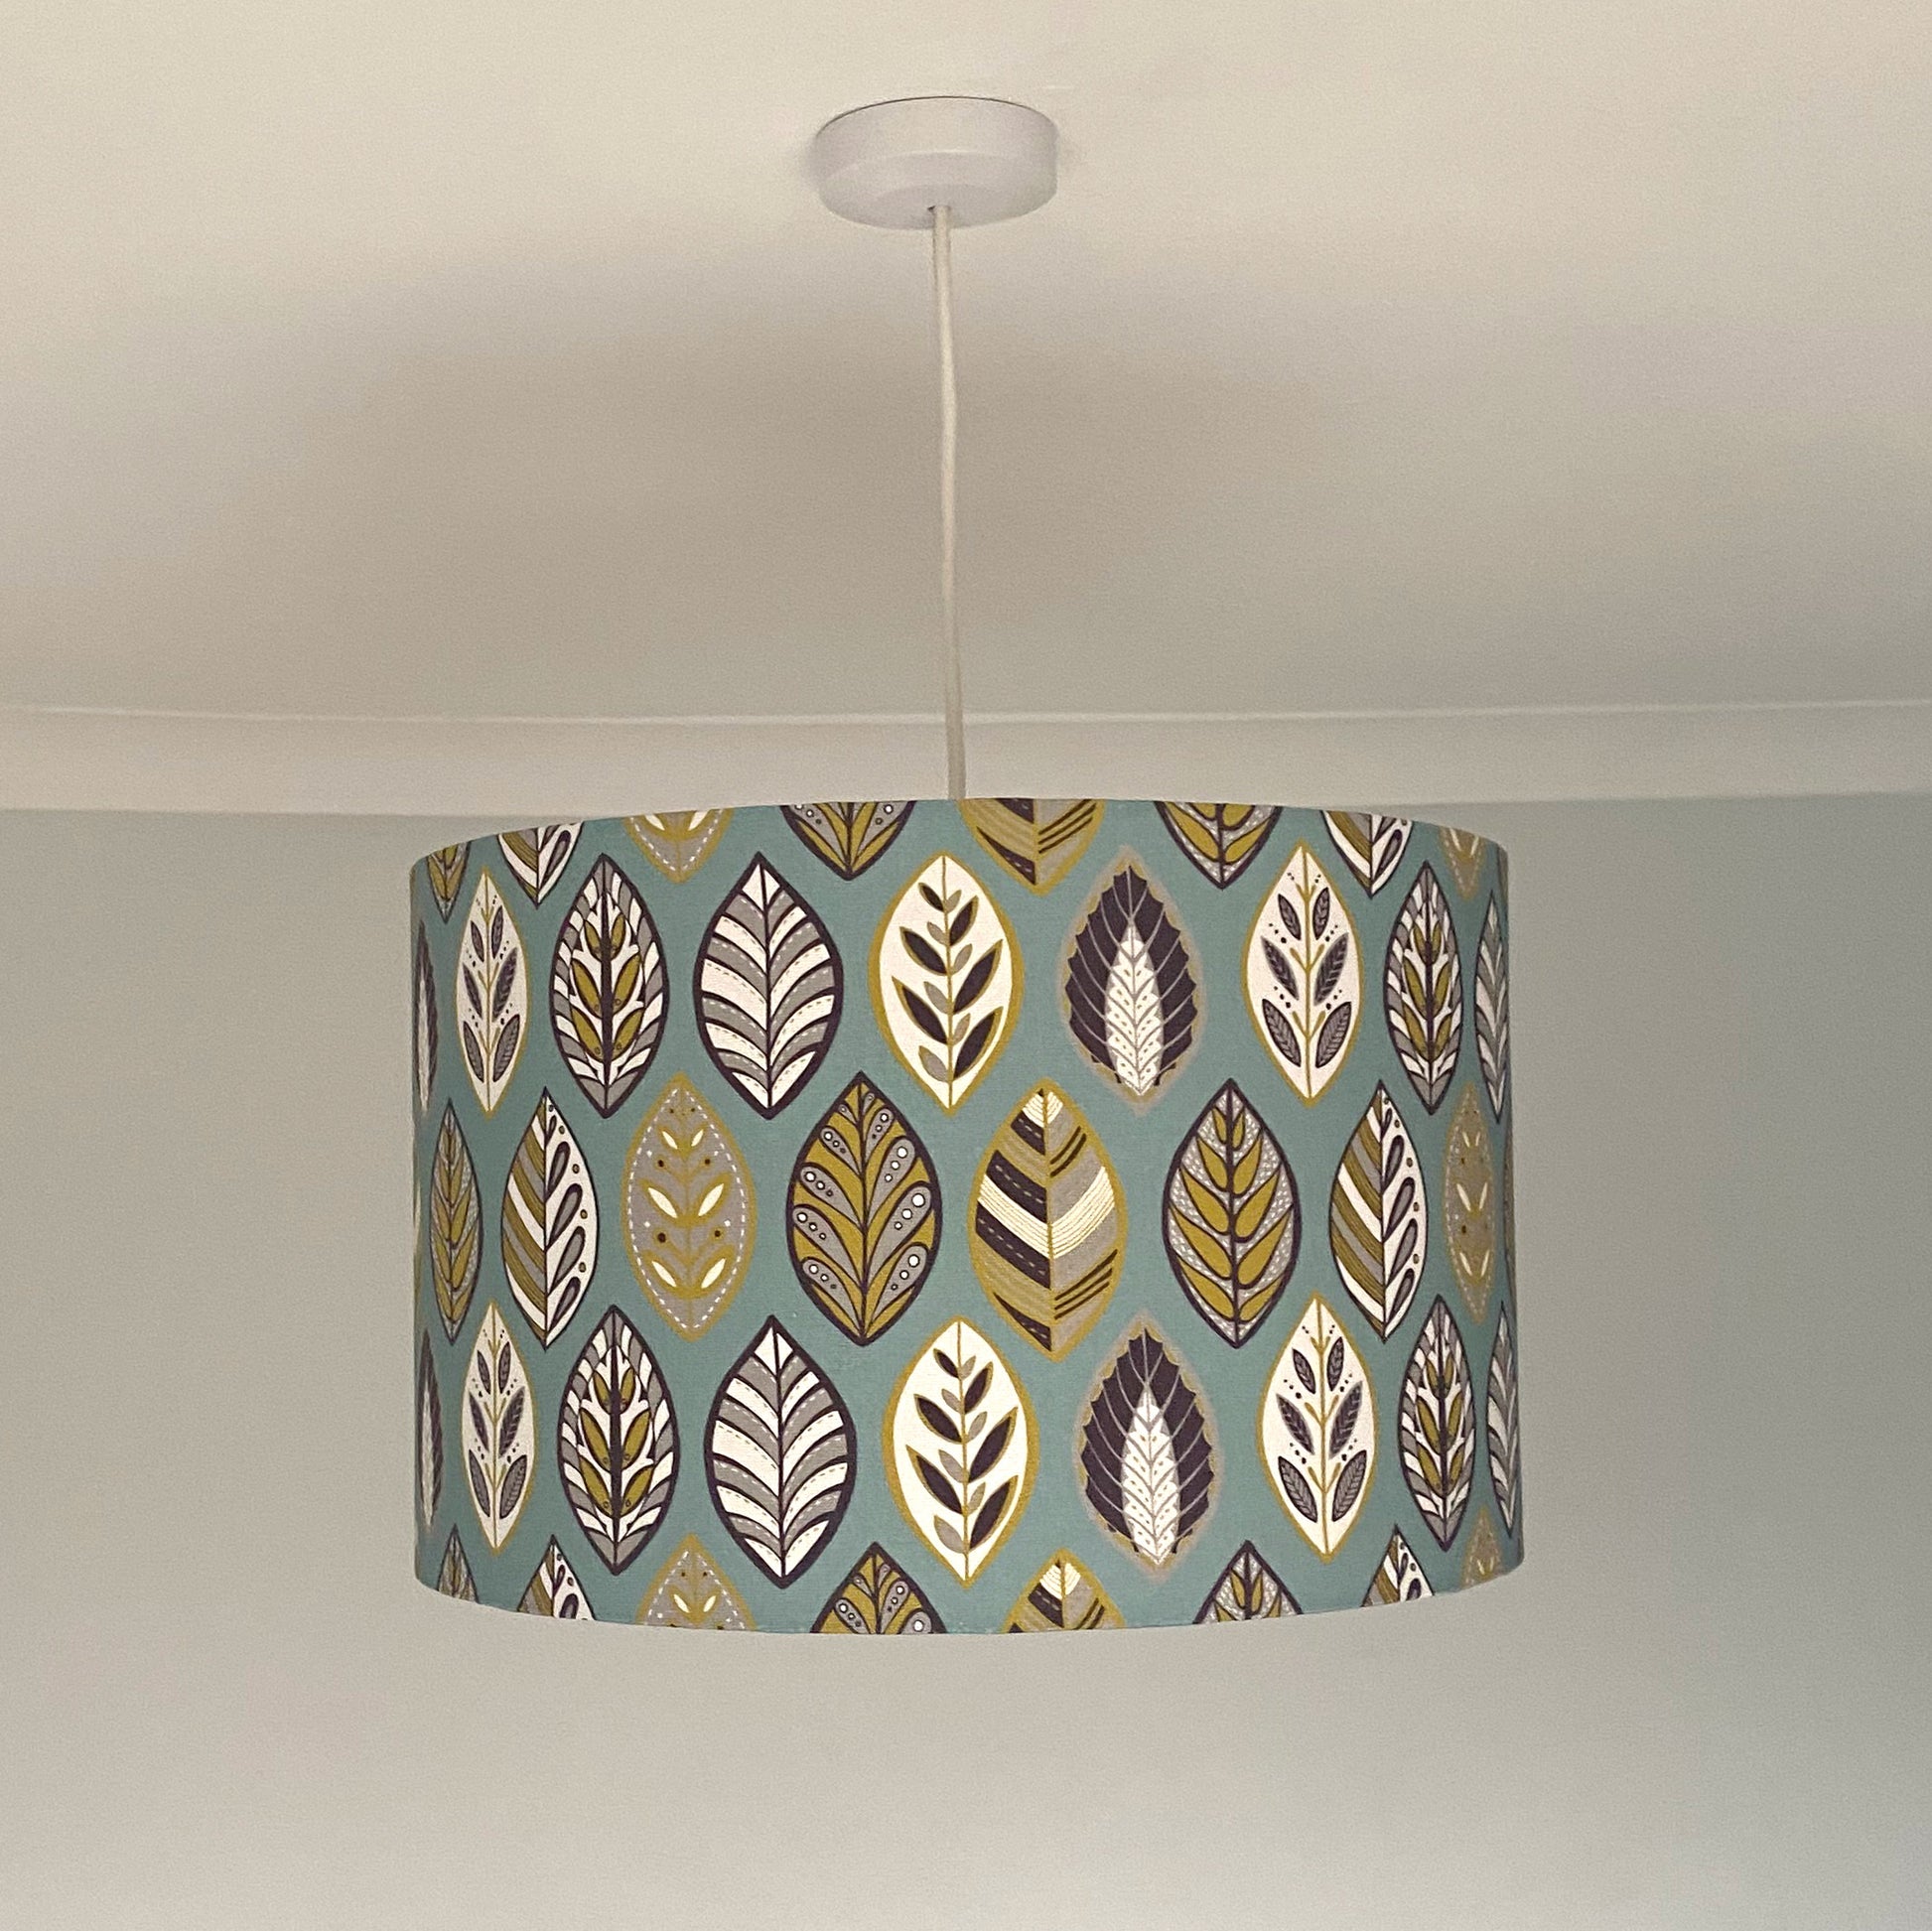 Large Blue Beech leaf Lampshade, shown here on a ceiling pendant. The pattern features a Skandi style Blue, yellow, grey and white Leaf pattern on a Blue Background. Shown with the light switched off.